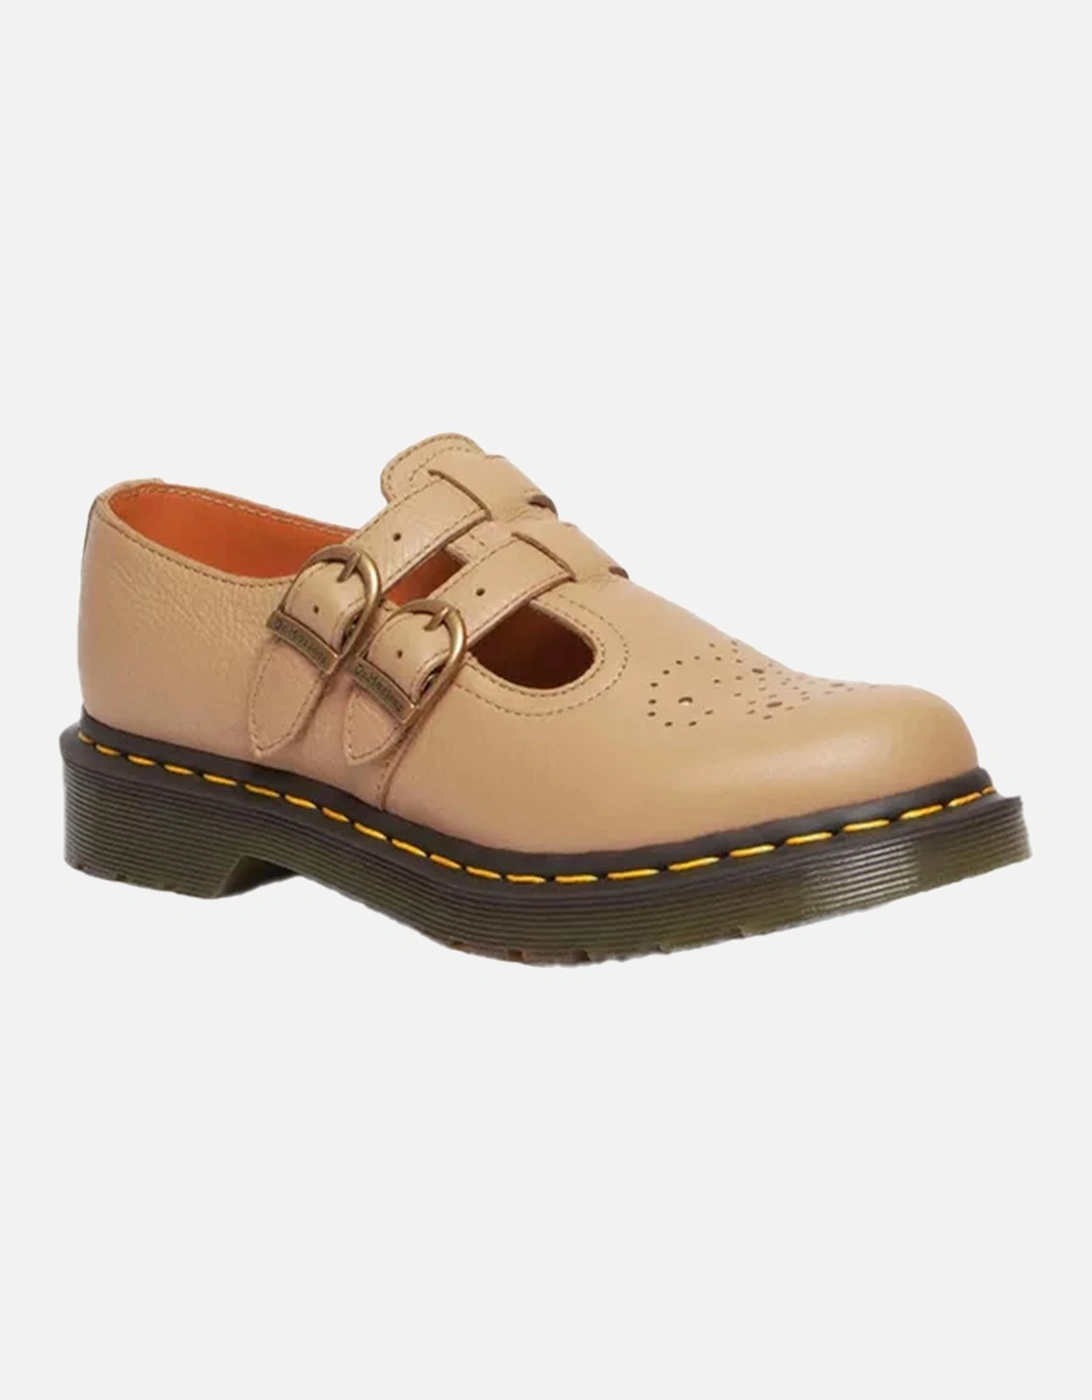 Dr. Martens Womens Mary Jane Virginia Shoes (Tan), 8 of 7